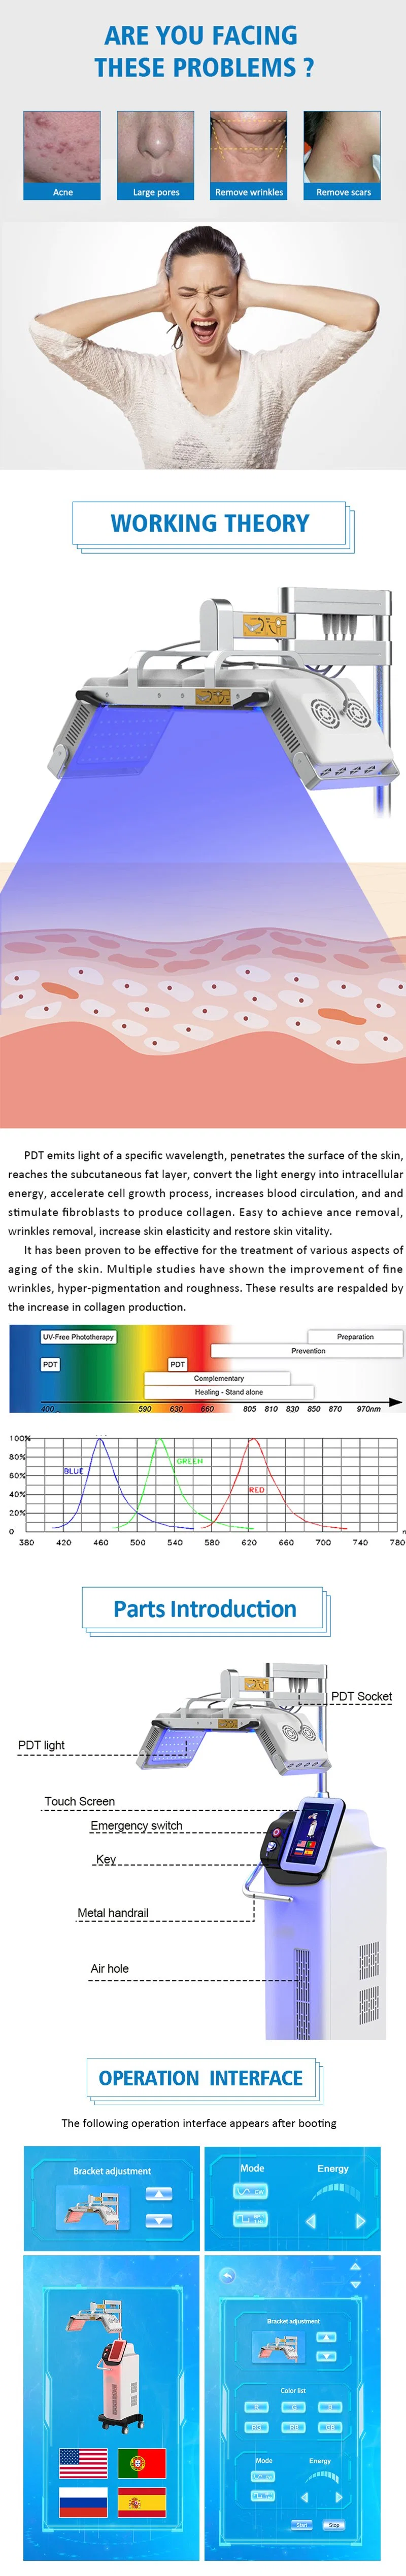 Beauty Salon Equipment Anti-Aging Weight Loss Full Body Treatment PDT Machine Photodynamic Collagen Red Light Therapy LED